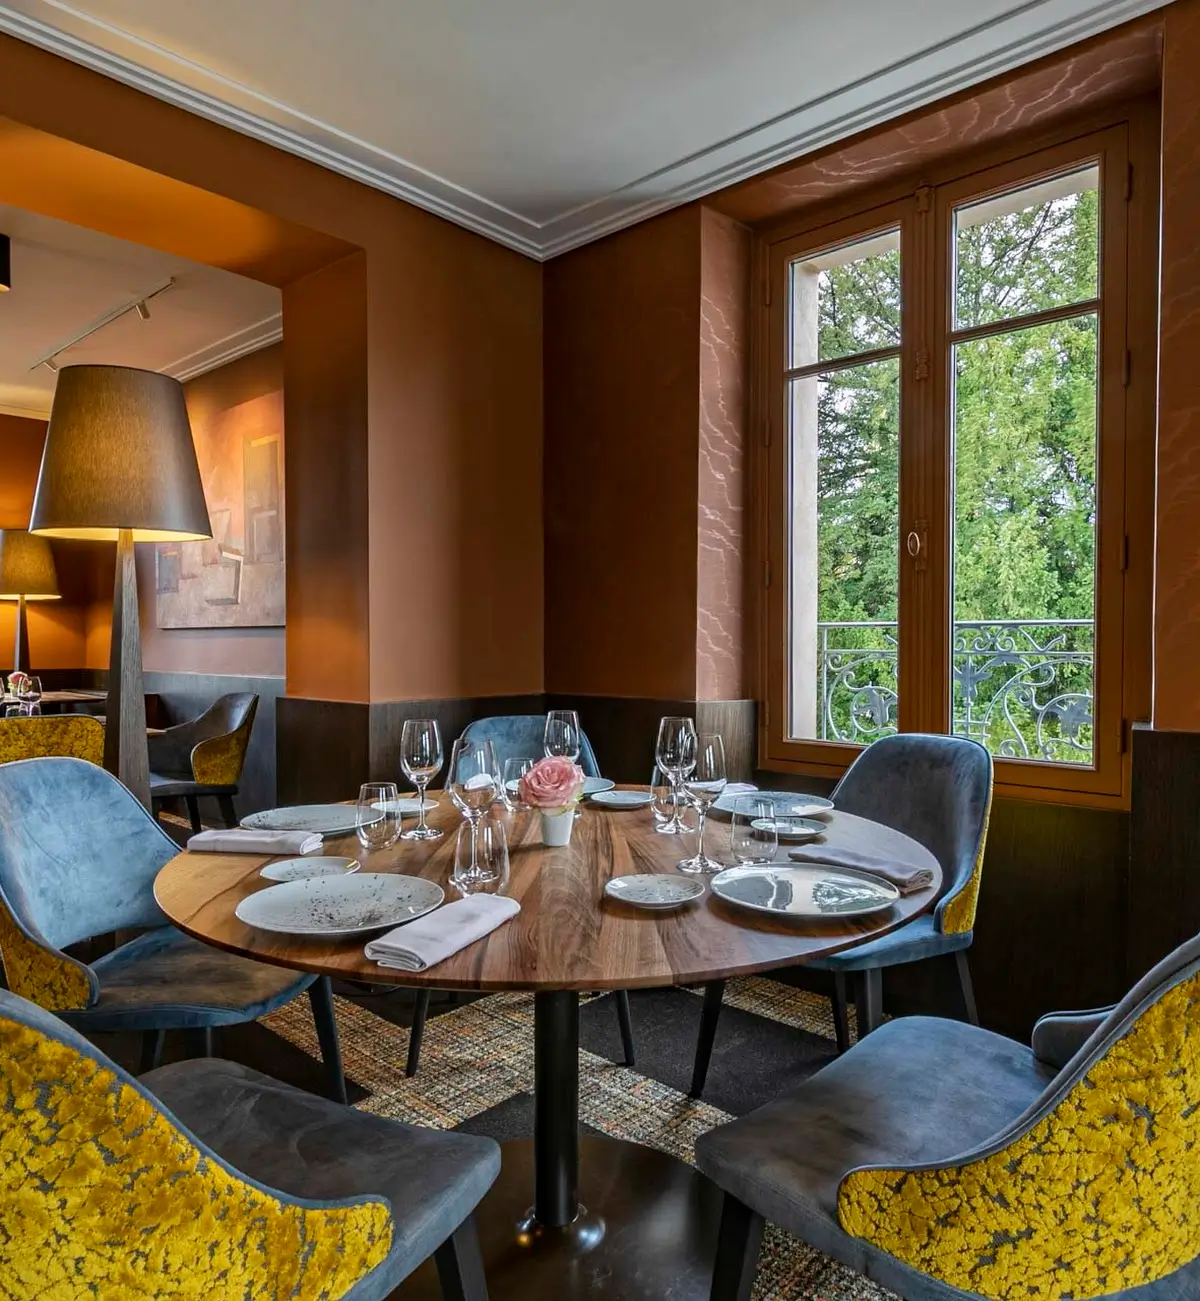 A cozy dining area at L’Escarbille, one of the affordable Michelin star restaurants in Paris, featuring a round table set for dining with elegant decor and large windows overlooking greenery.